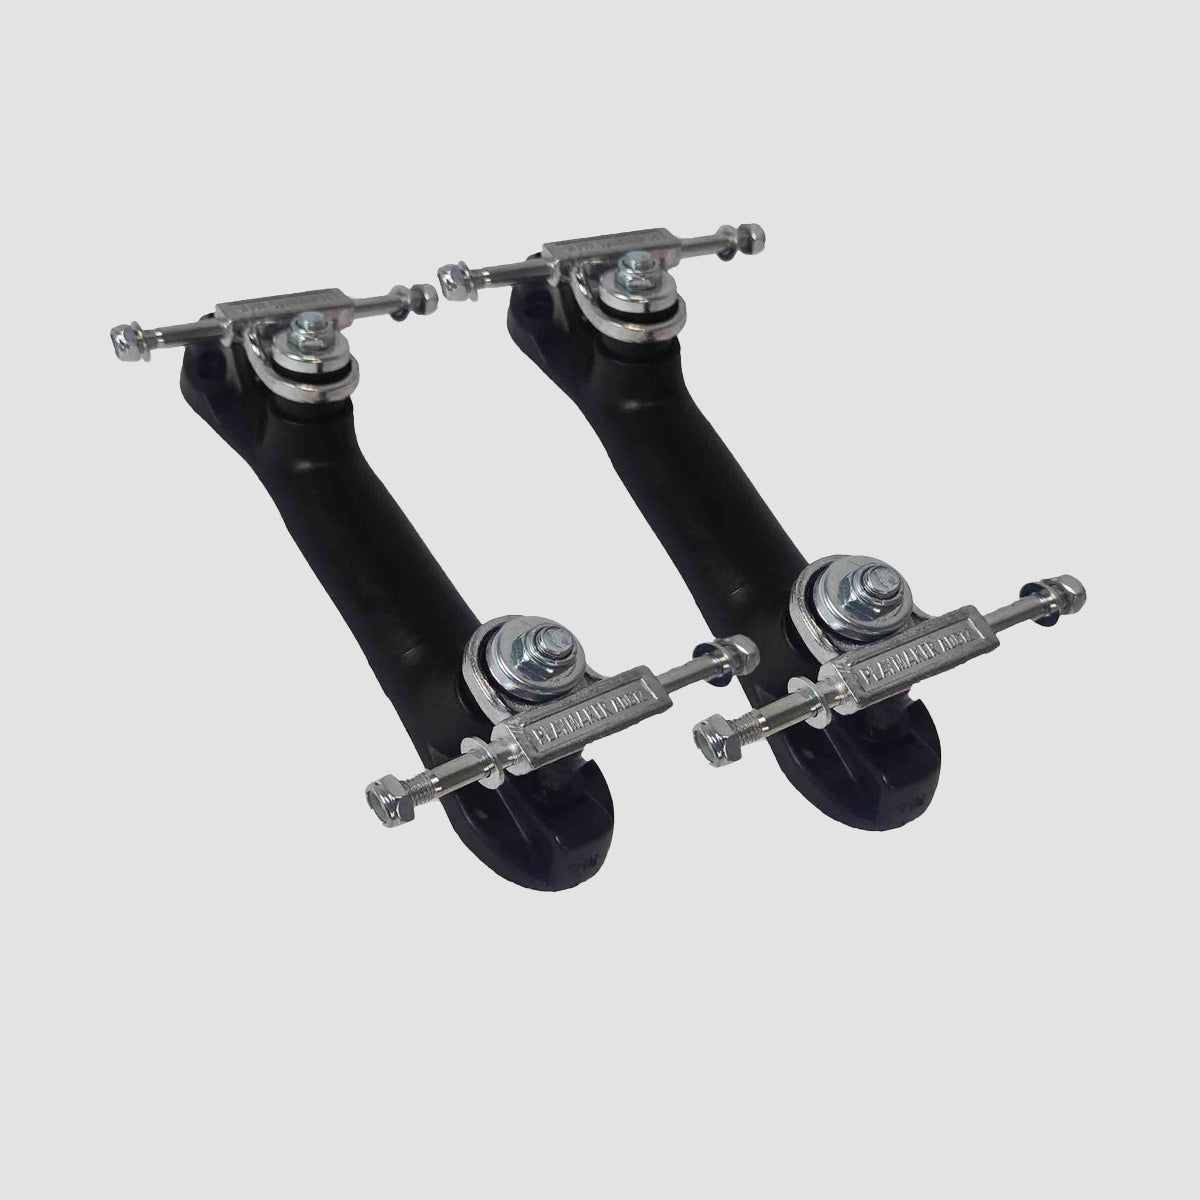 Playmaker Quad Skate Plates with Fixing Kit 1 Pair